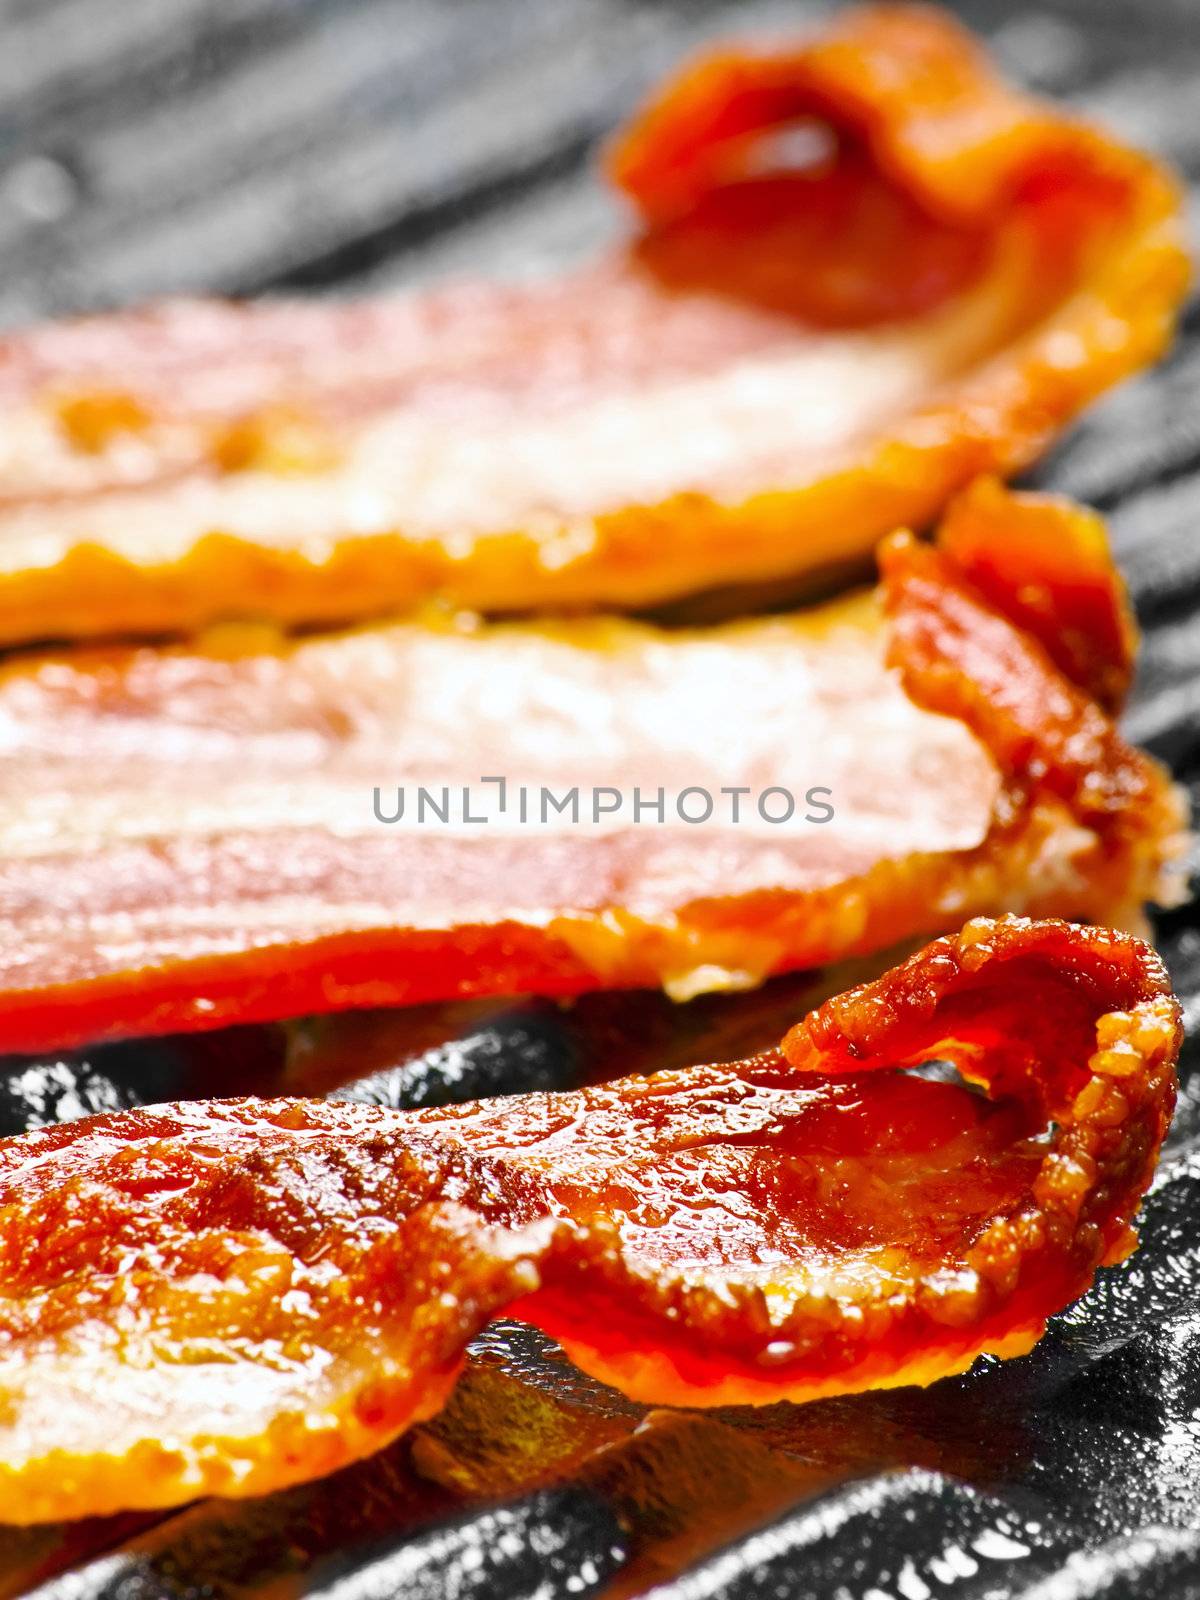 grilled bacon by zkruger